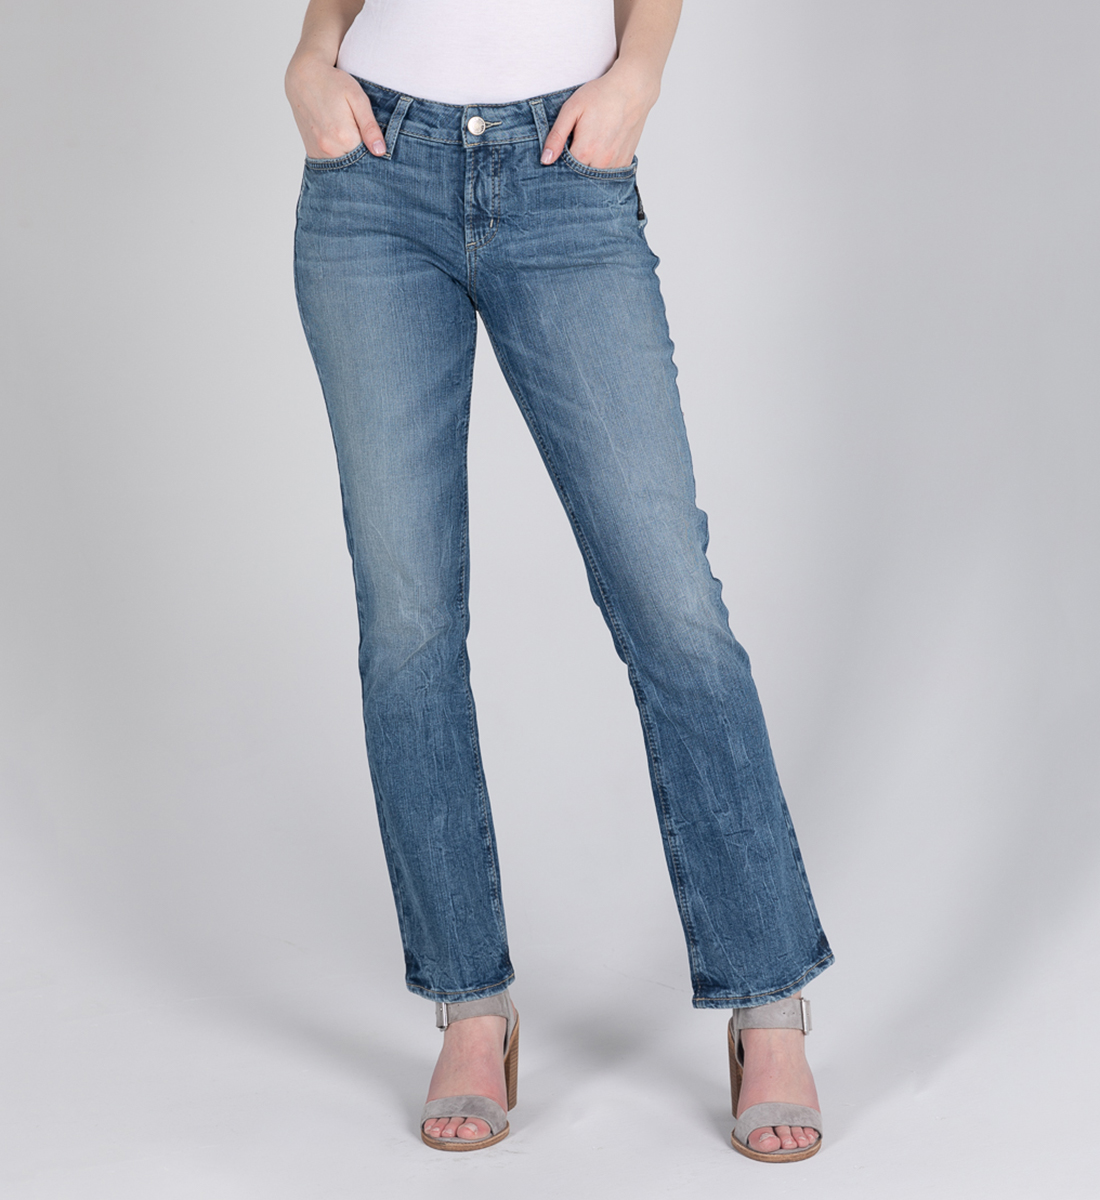 Elyse Mid Rise Slim Bootcut Jeans - Silver Jeans US